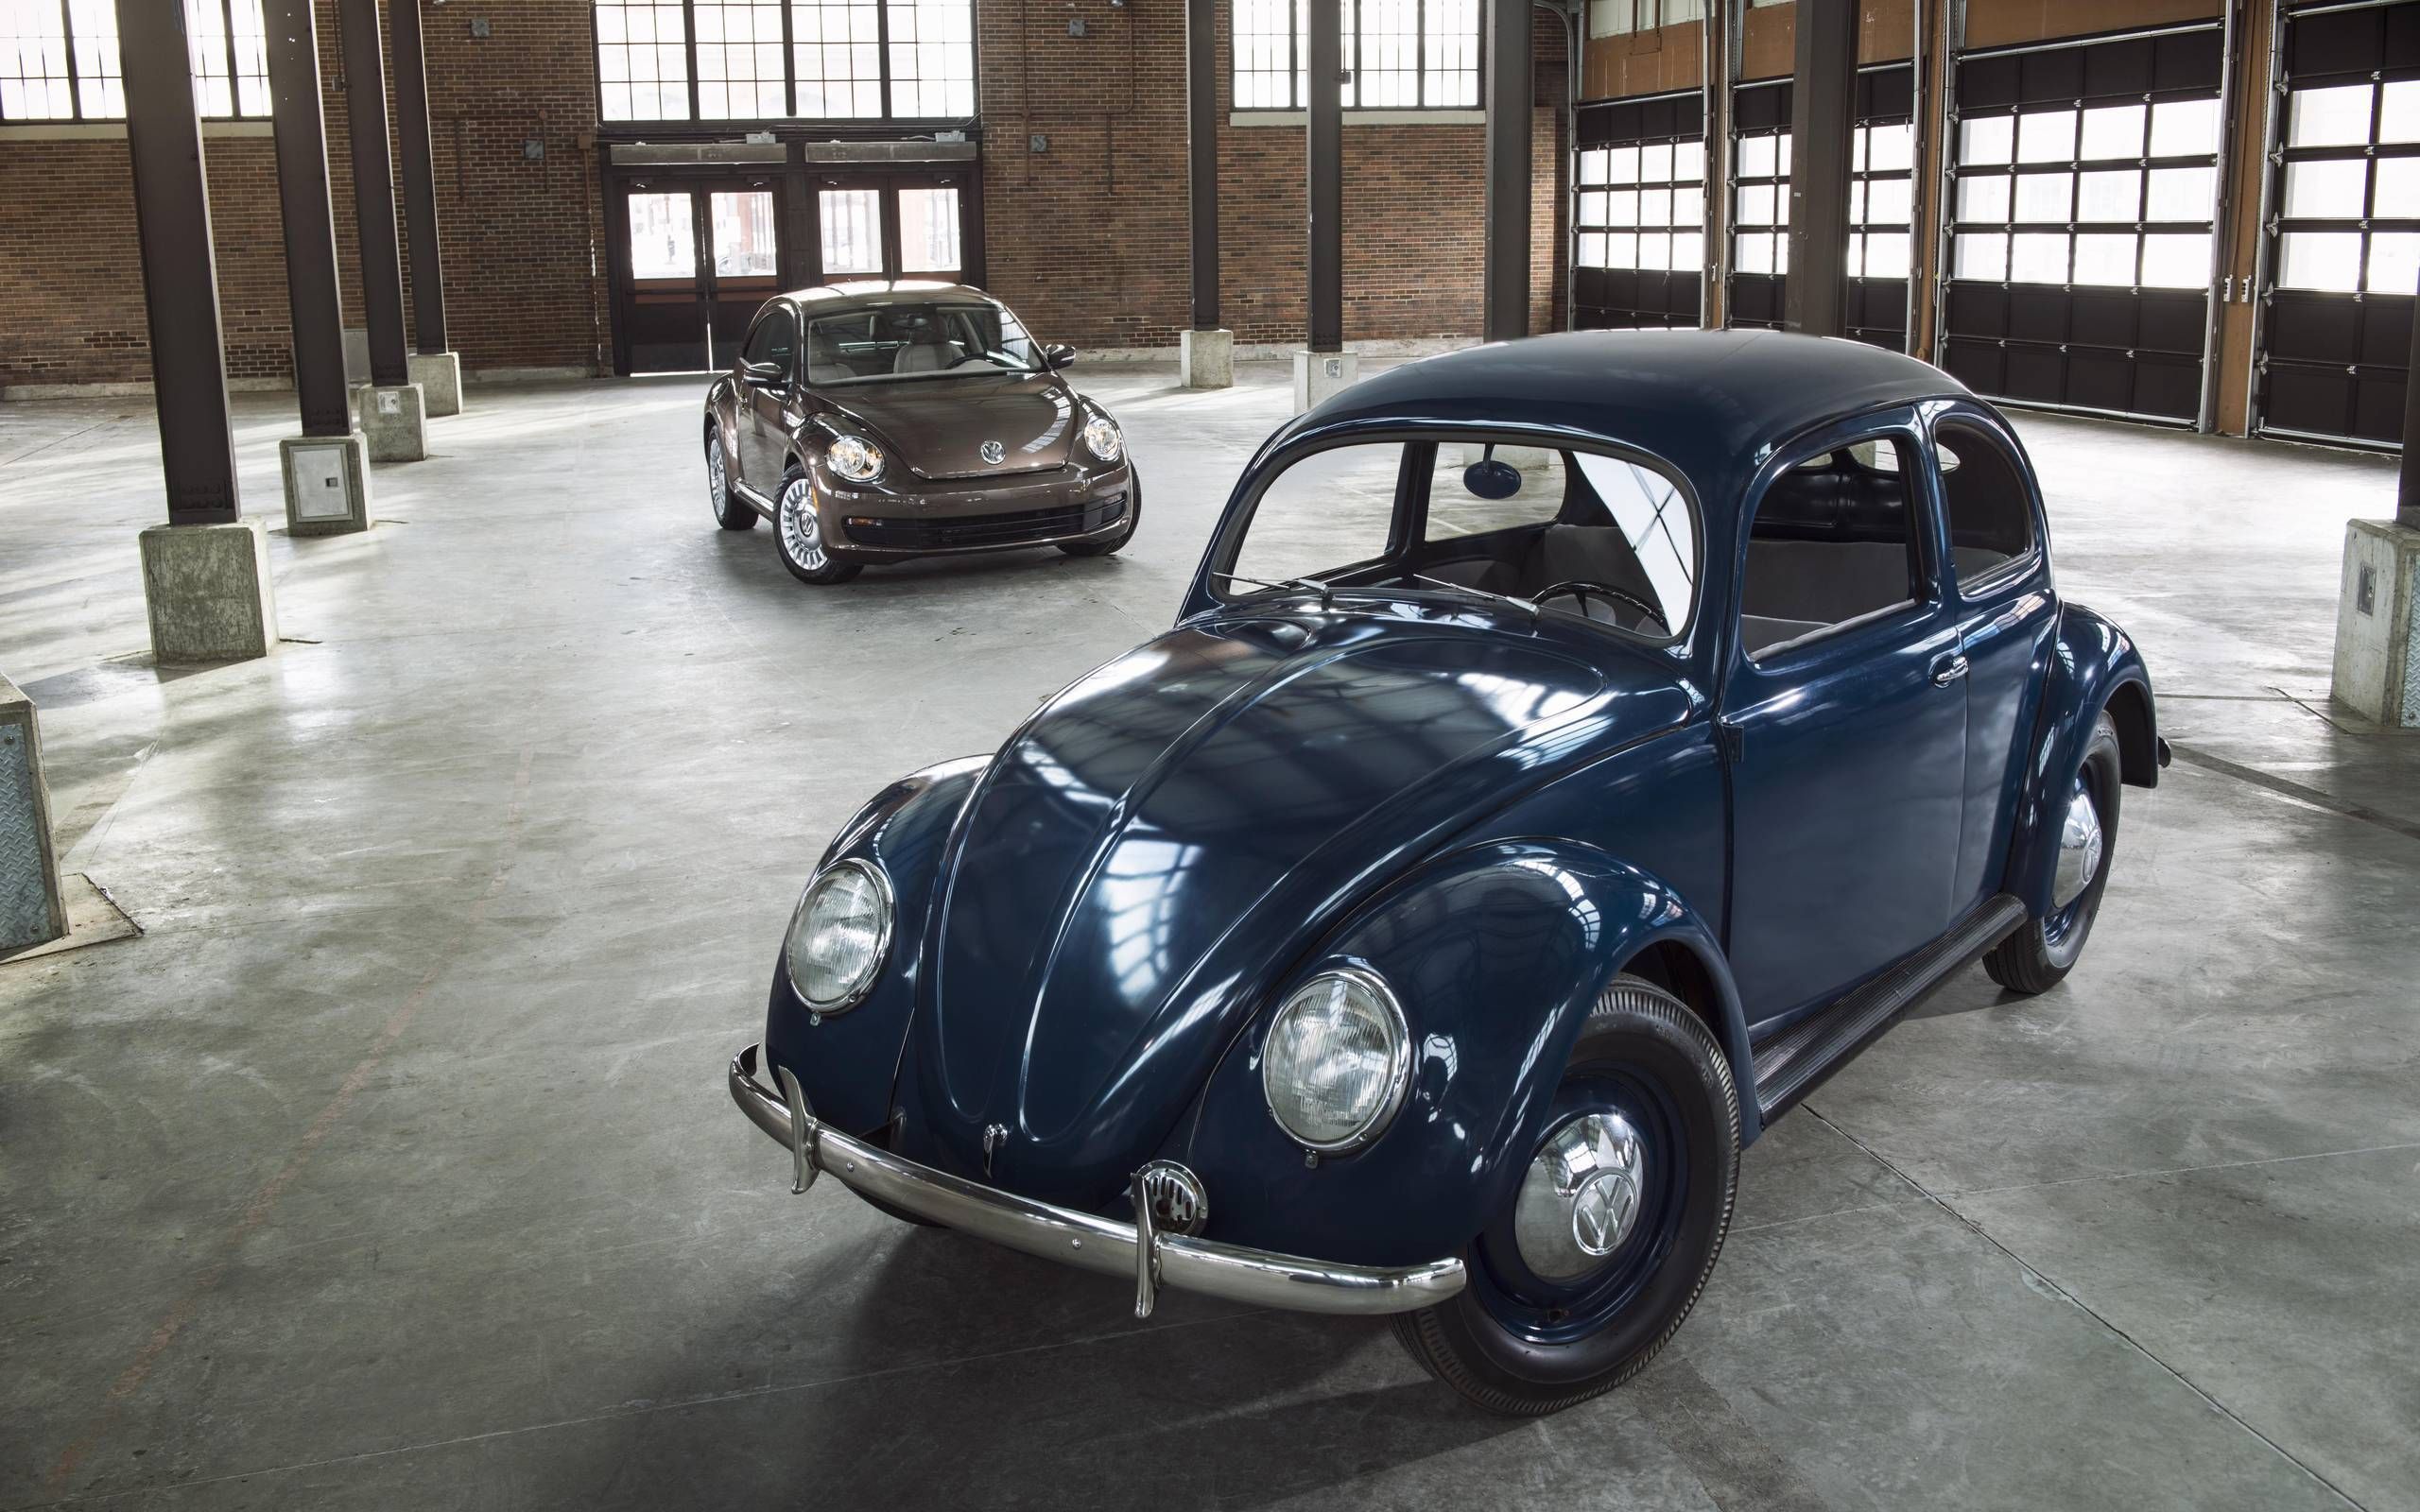 The first Volkswagen Beetle in America looked like this